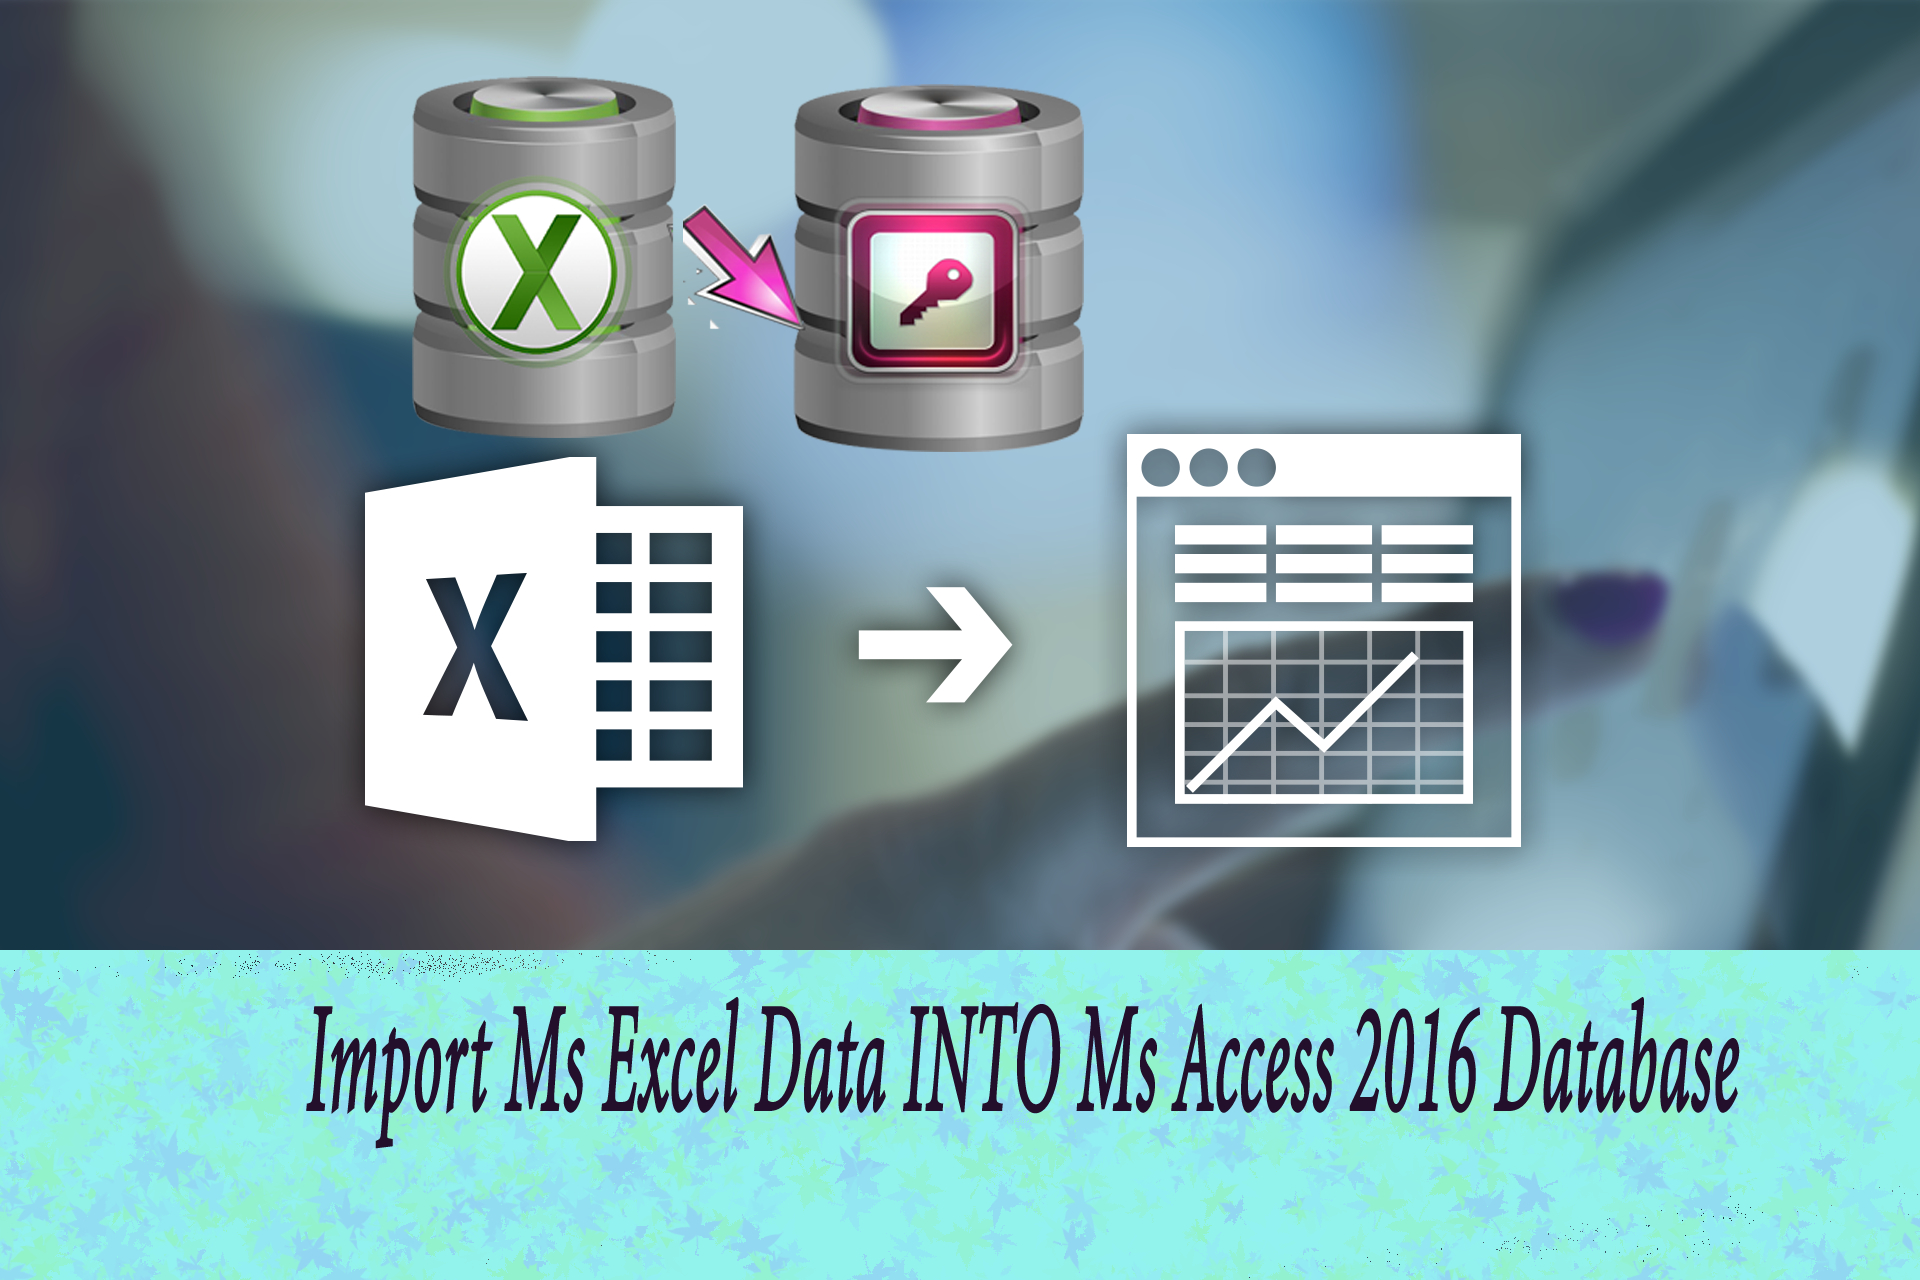 How To Import Or Link Ms Excel Data Into Ms Access 2016/2013/2010 with Convert Excel Spreadsheet To Access Database 2010